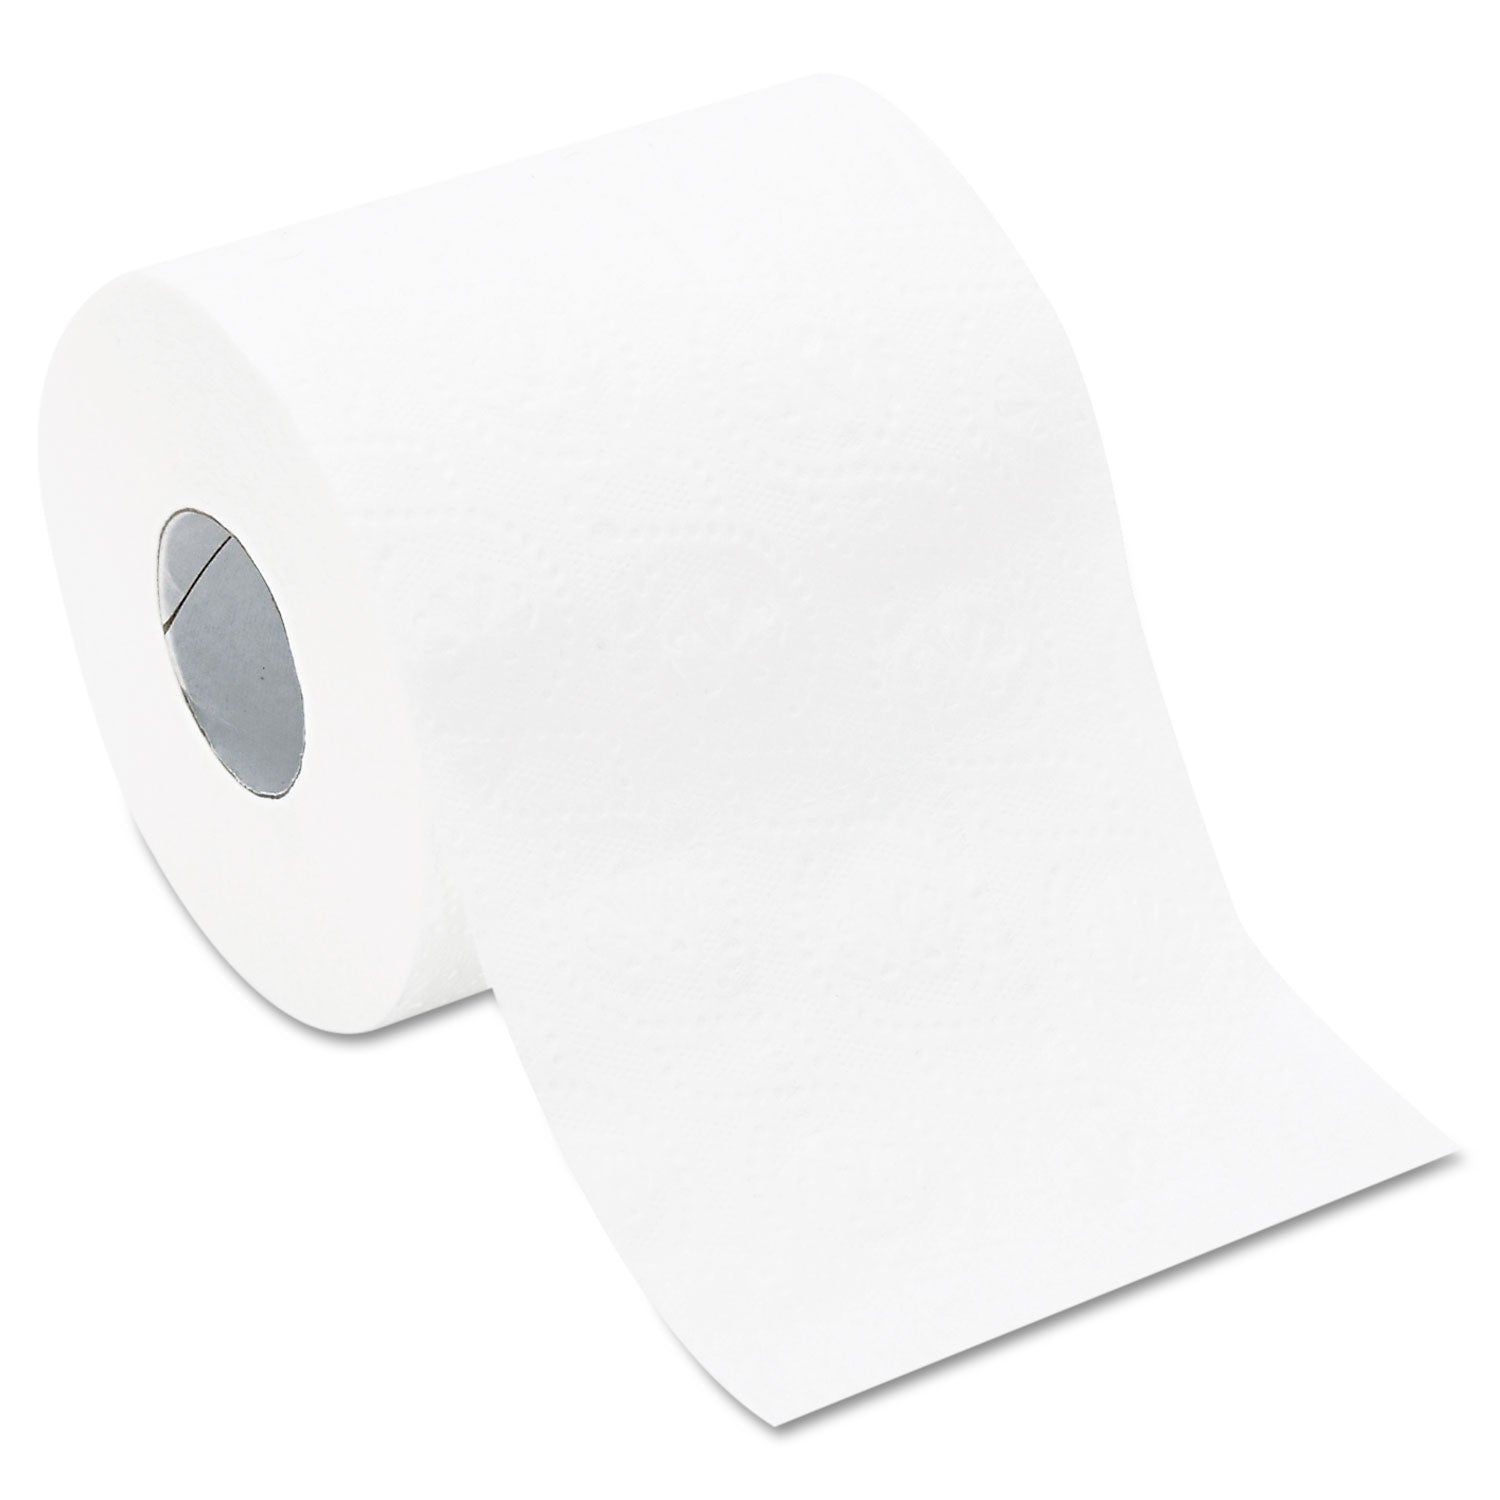 Bath Tissue, Septic Safe, 2-Ply, White, 420 Sheets/Roll, 96 Rolls/Carton - 